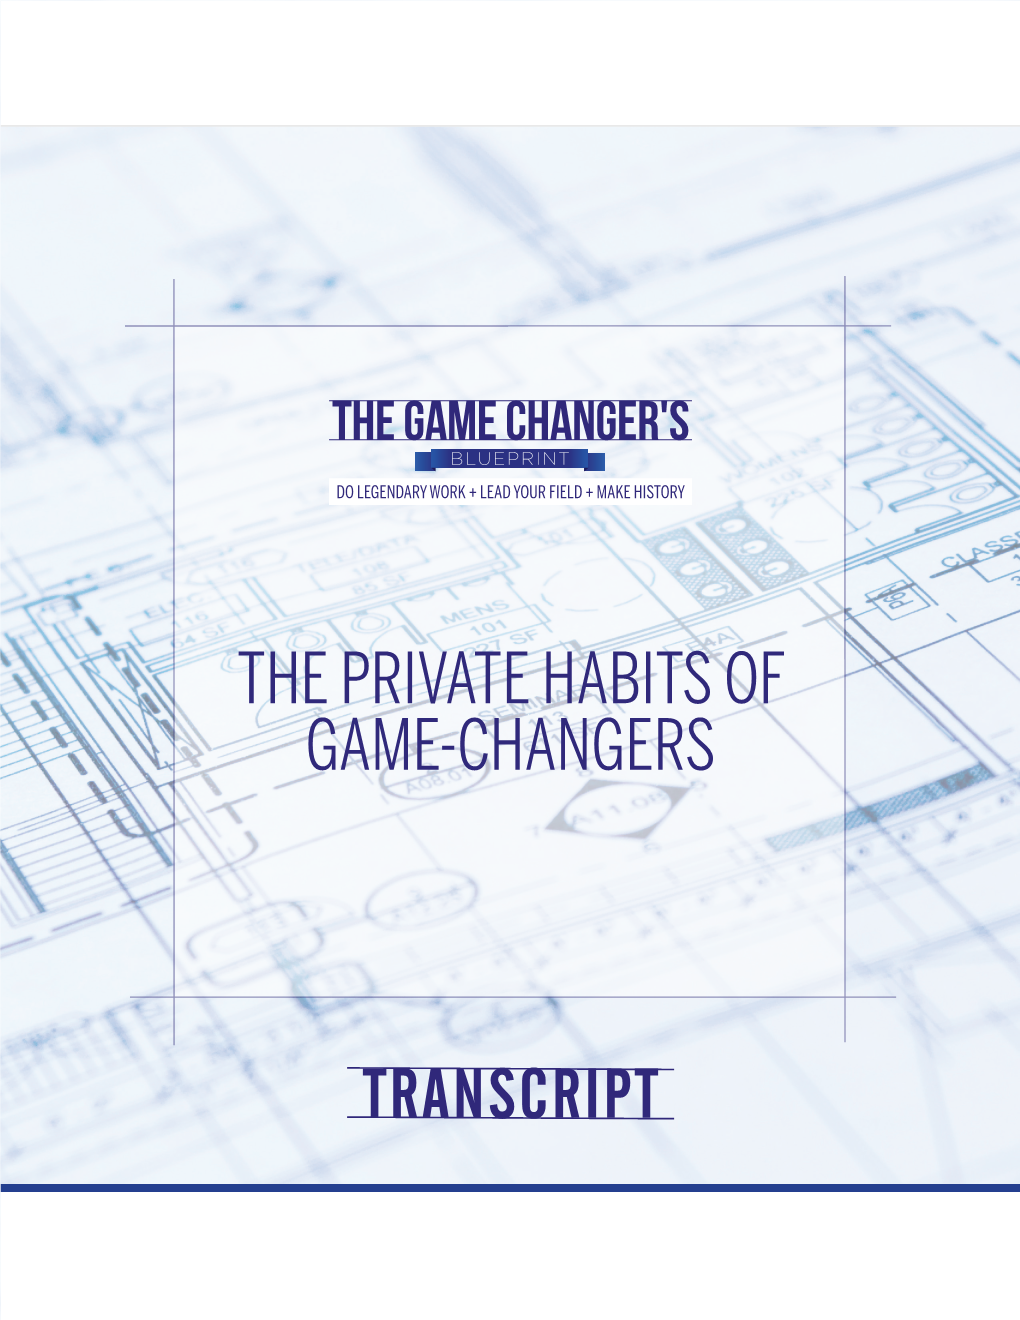 The Private Habits of Game-Changers Transcript